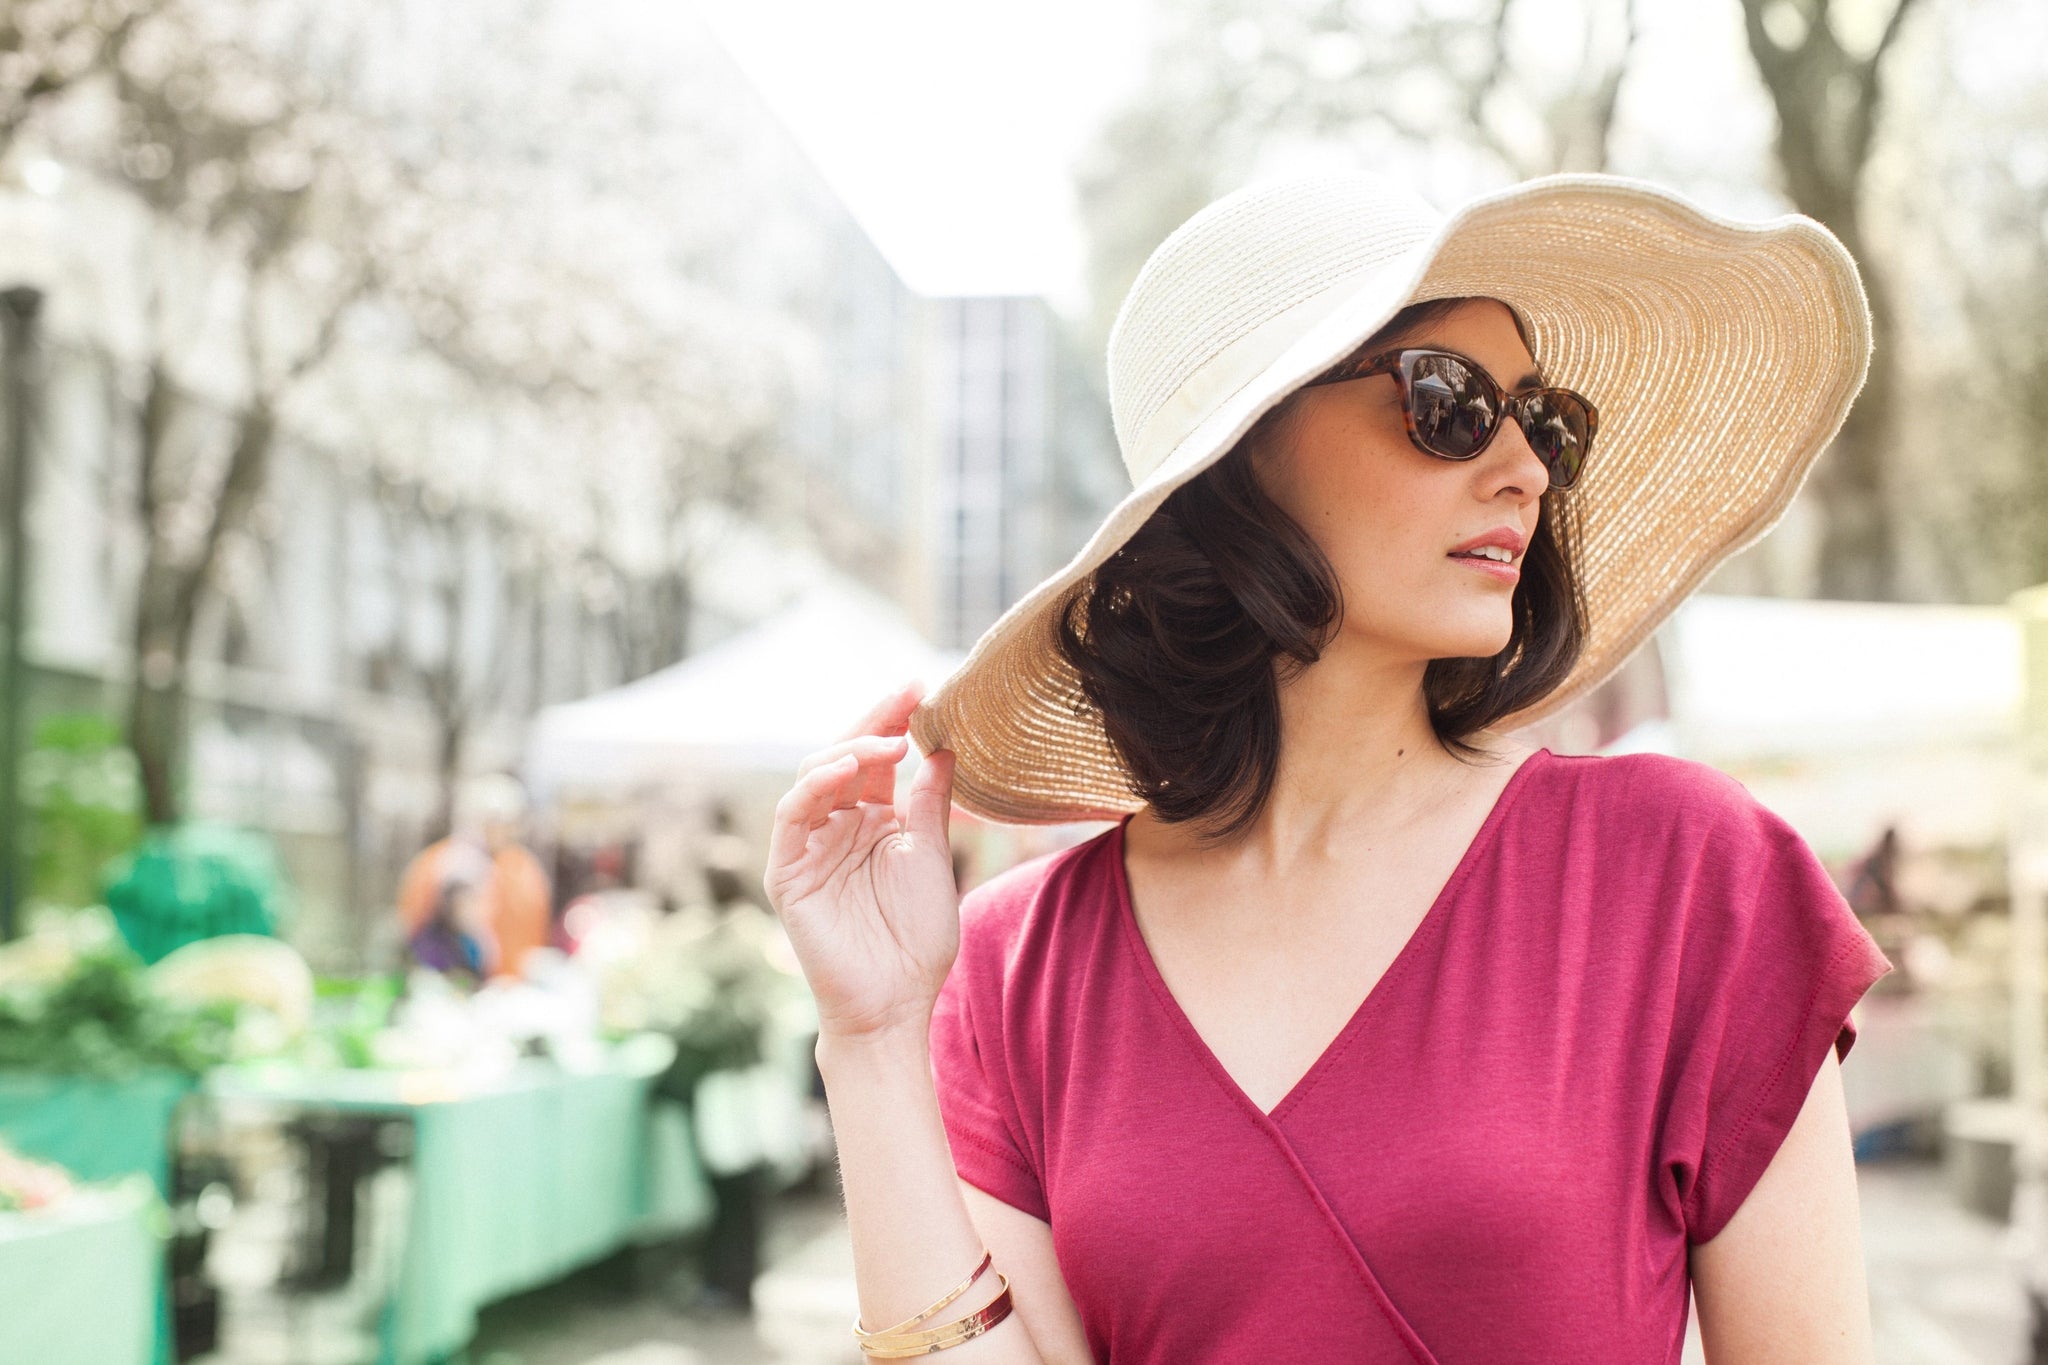 7 Reasons Why You Should Wear Sunglasses More Often